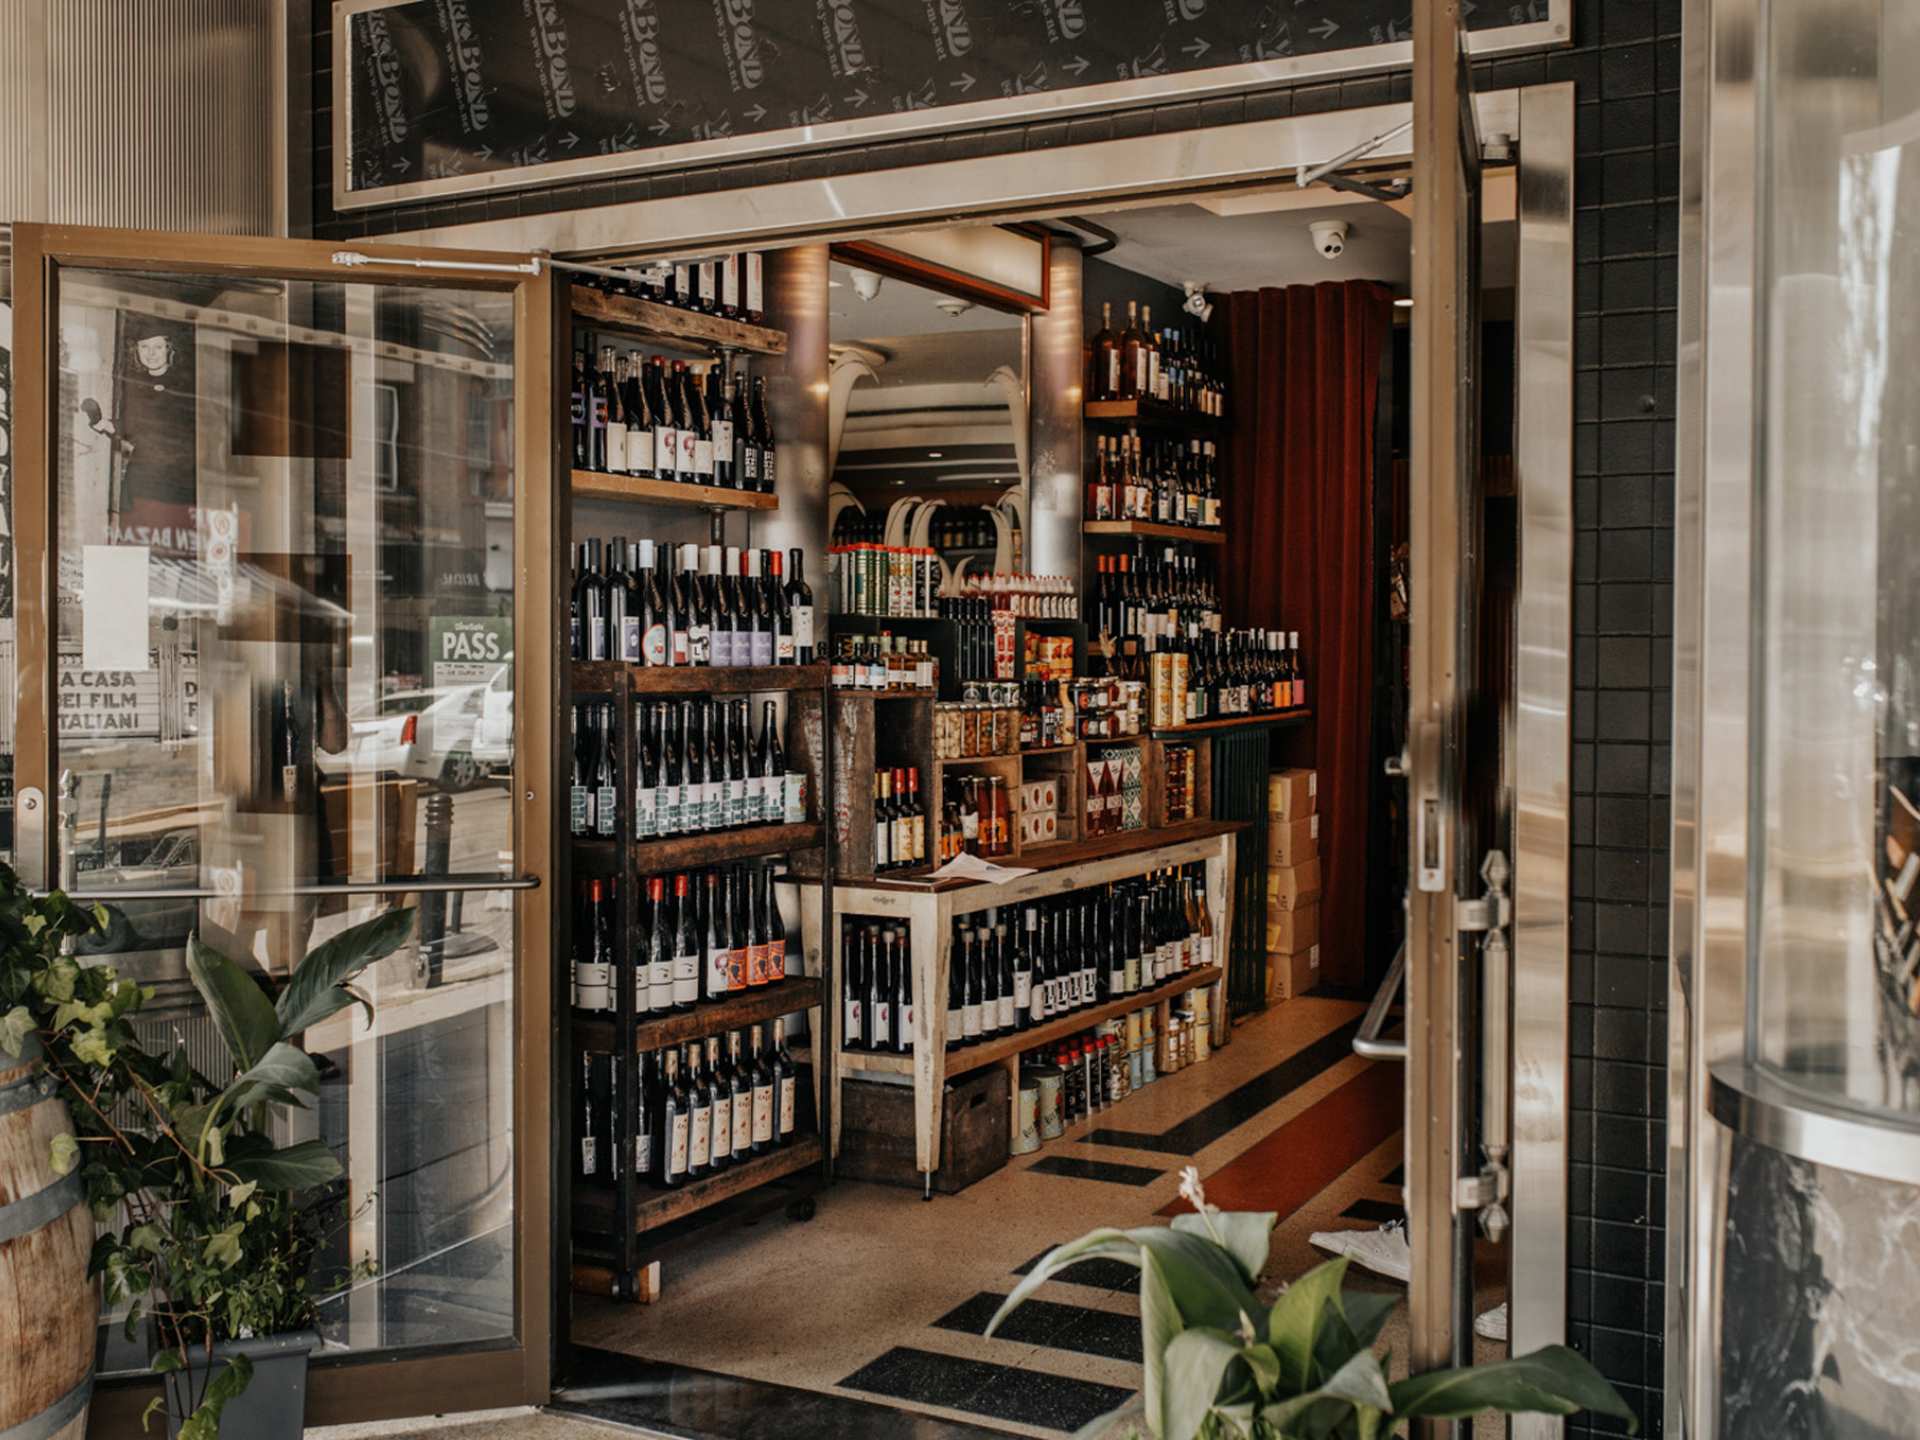 Toronto bottle shops and alcohol stores | The entrance of Bottega Volo in Littly Italy, Toronto